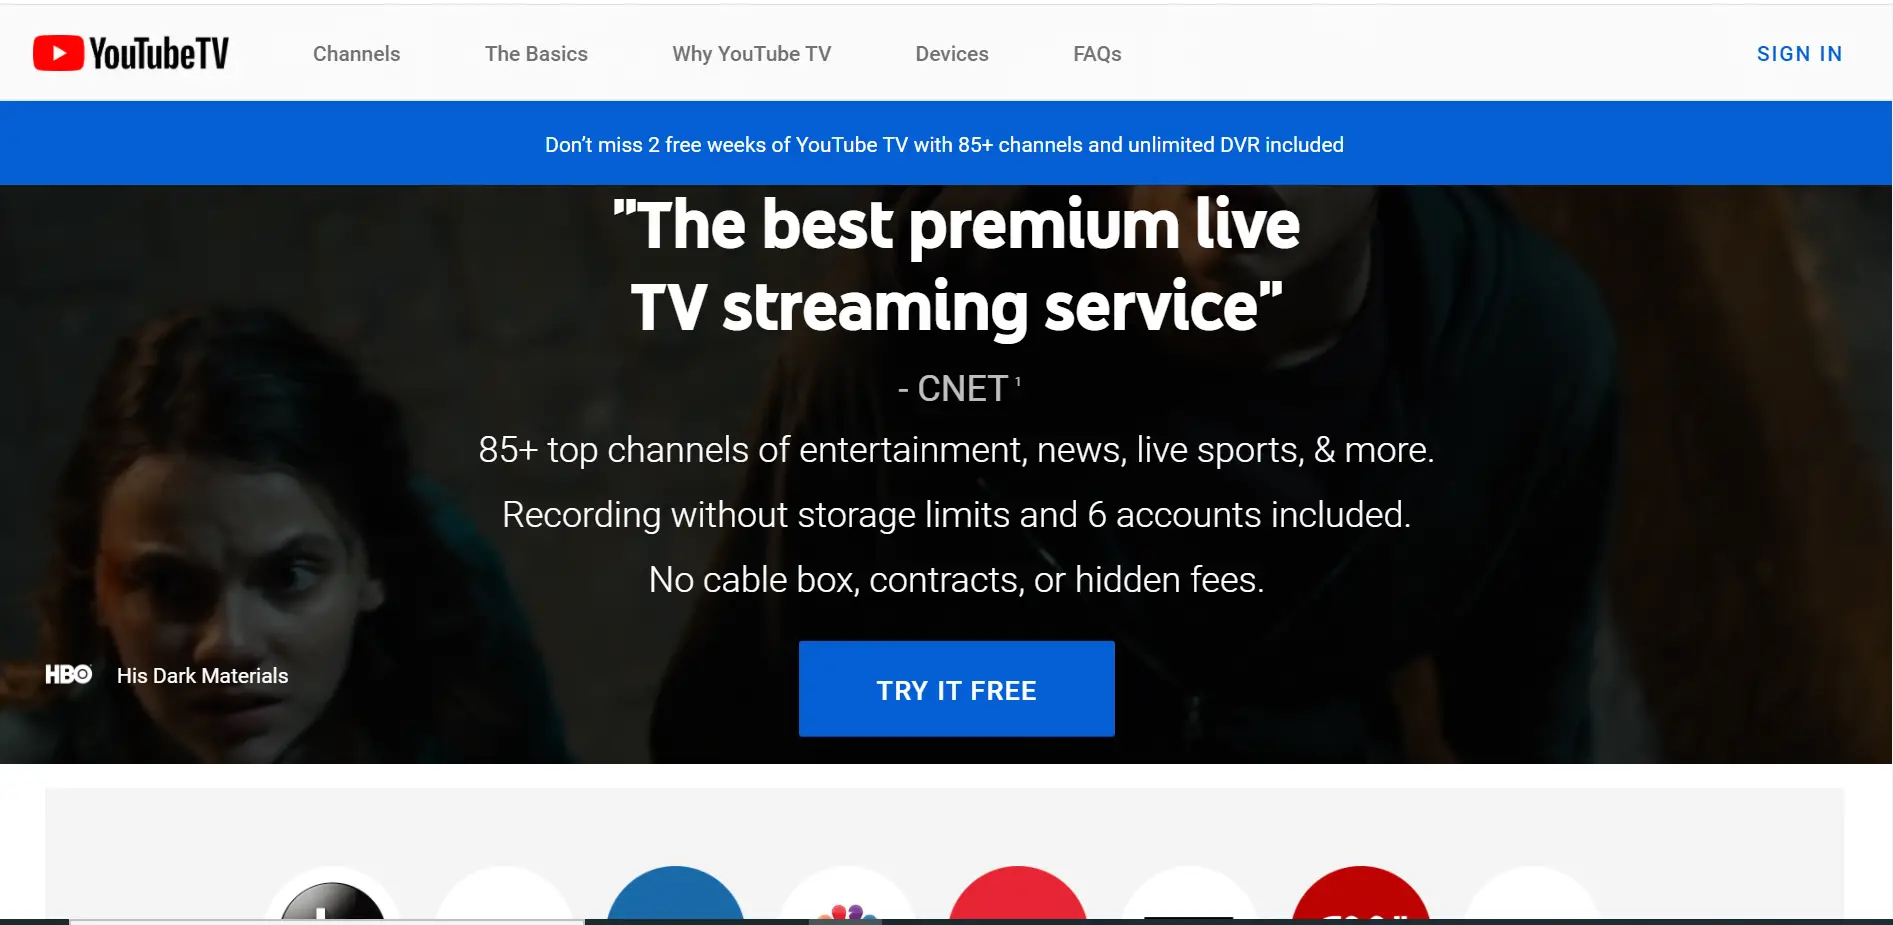 How to cancel your YouTube TV membership?